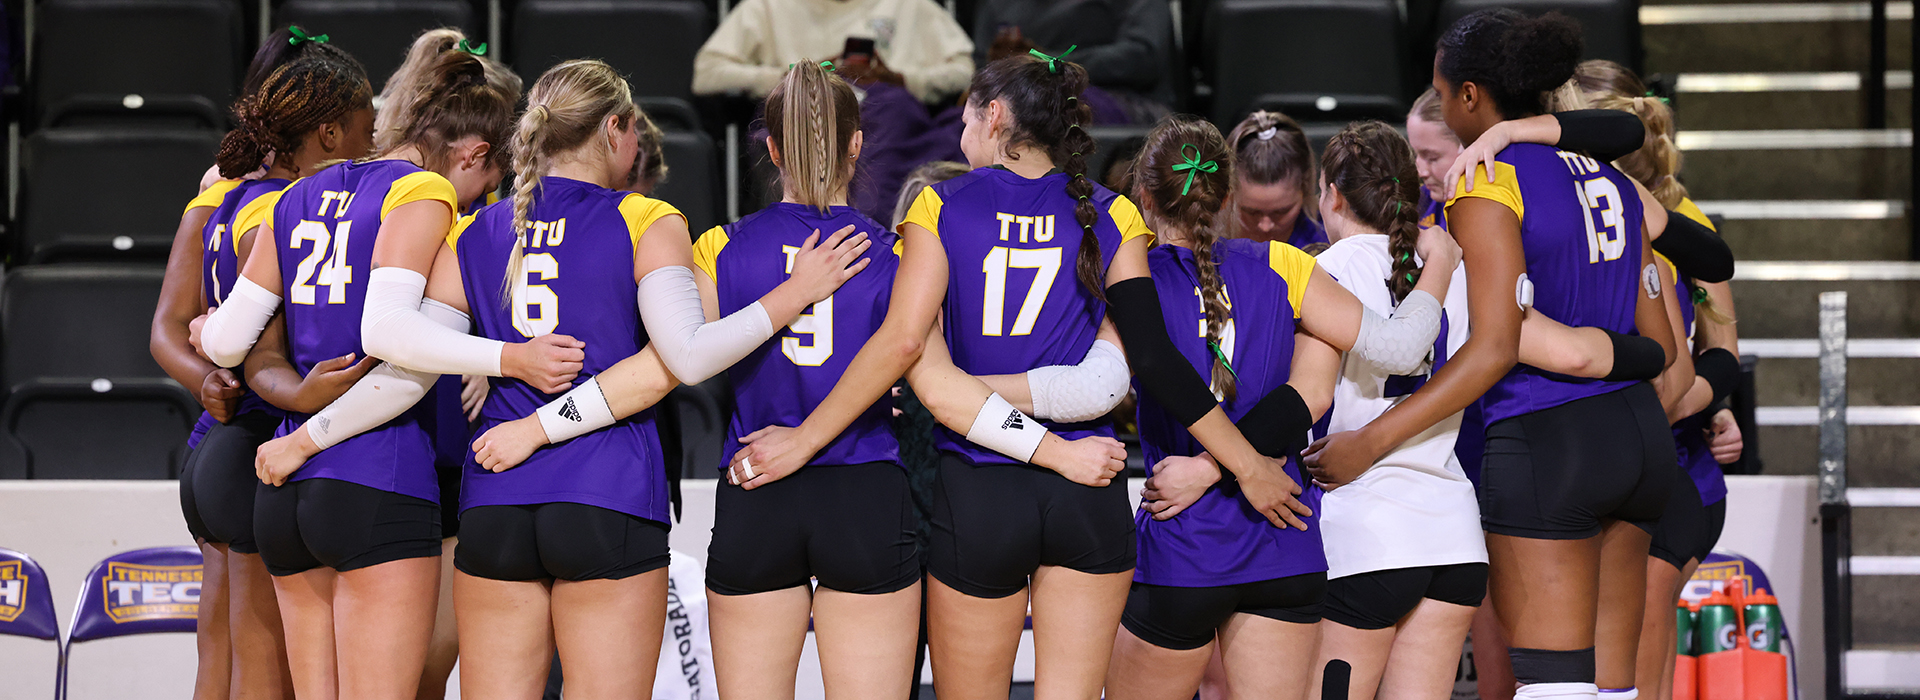 Tech slated for Wednesday tilt at Morehead State, weekend matches at home against Little Rock